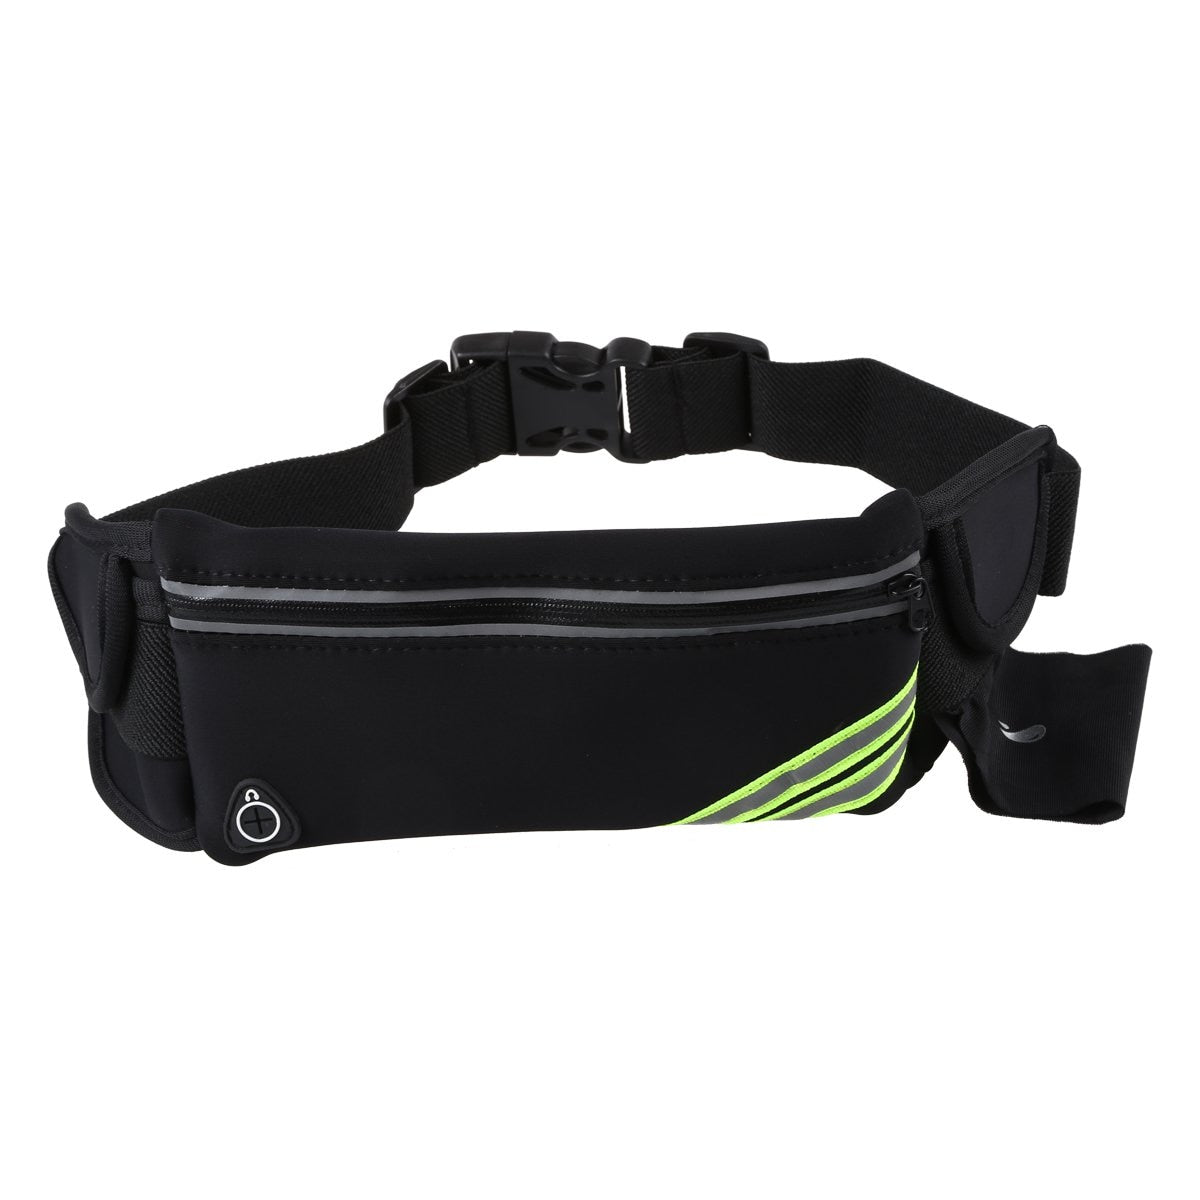 Running Belt Waist Pack Pouch Reflective Water Resistant Cell Phone Holder Bag for Workout Sports Walking Fitness Exercis - ebowsos